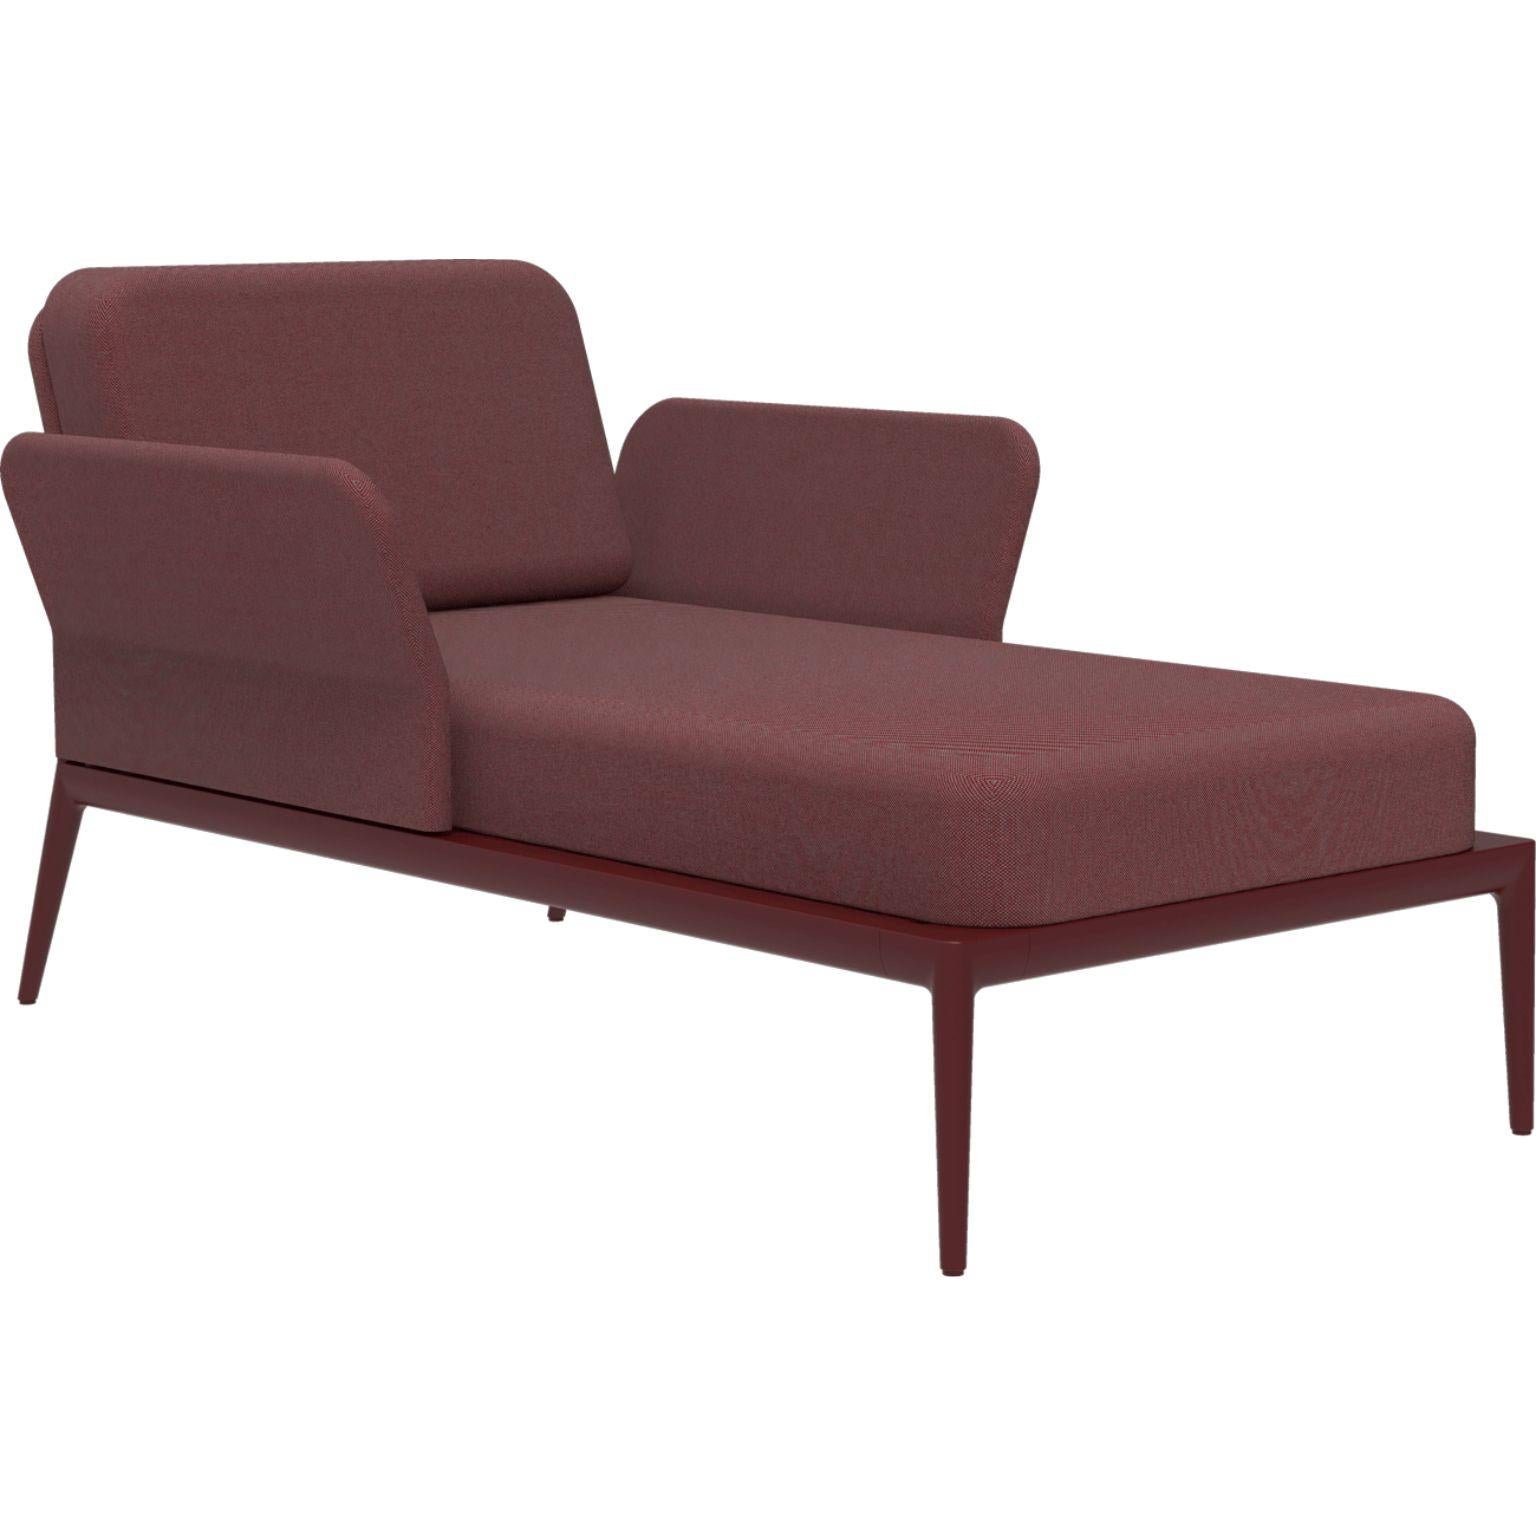 Cover burgundy divan by MOWEE.
Dimensions: D91 x W155 x H81 cm (seat height 42 cm).
Material: aluminum and upholstery.
Weight: 30 kg.
Also available in different colors and finishes.

An unmistakable collection for its beauty and robustness. A